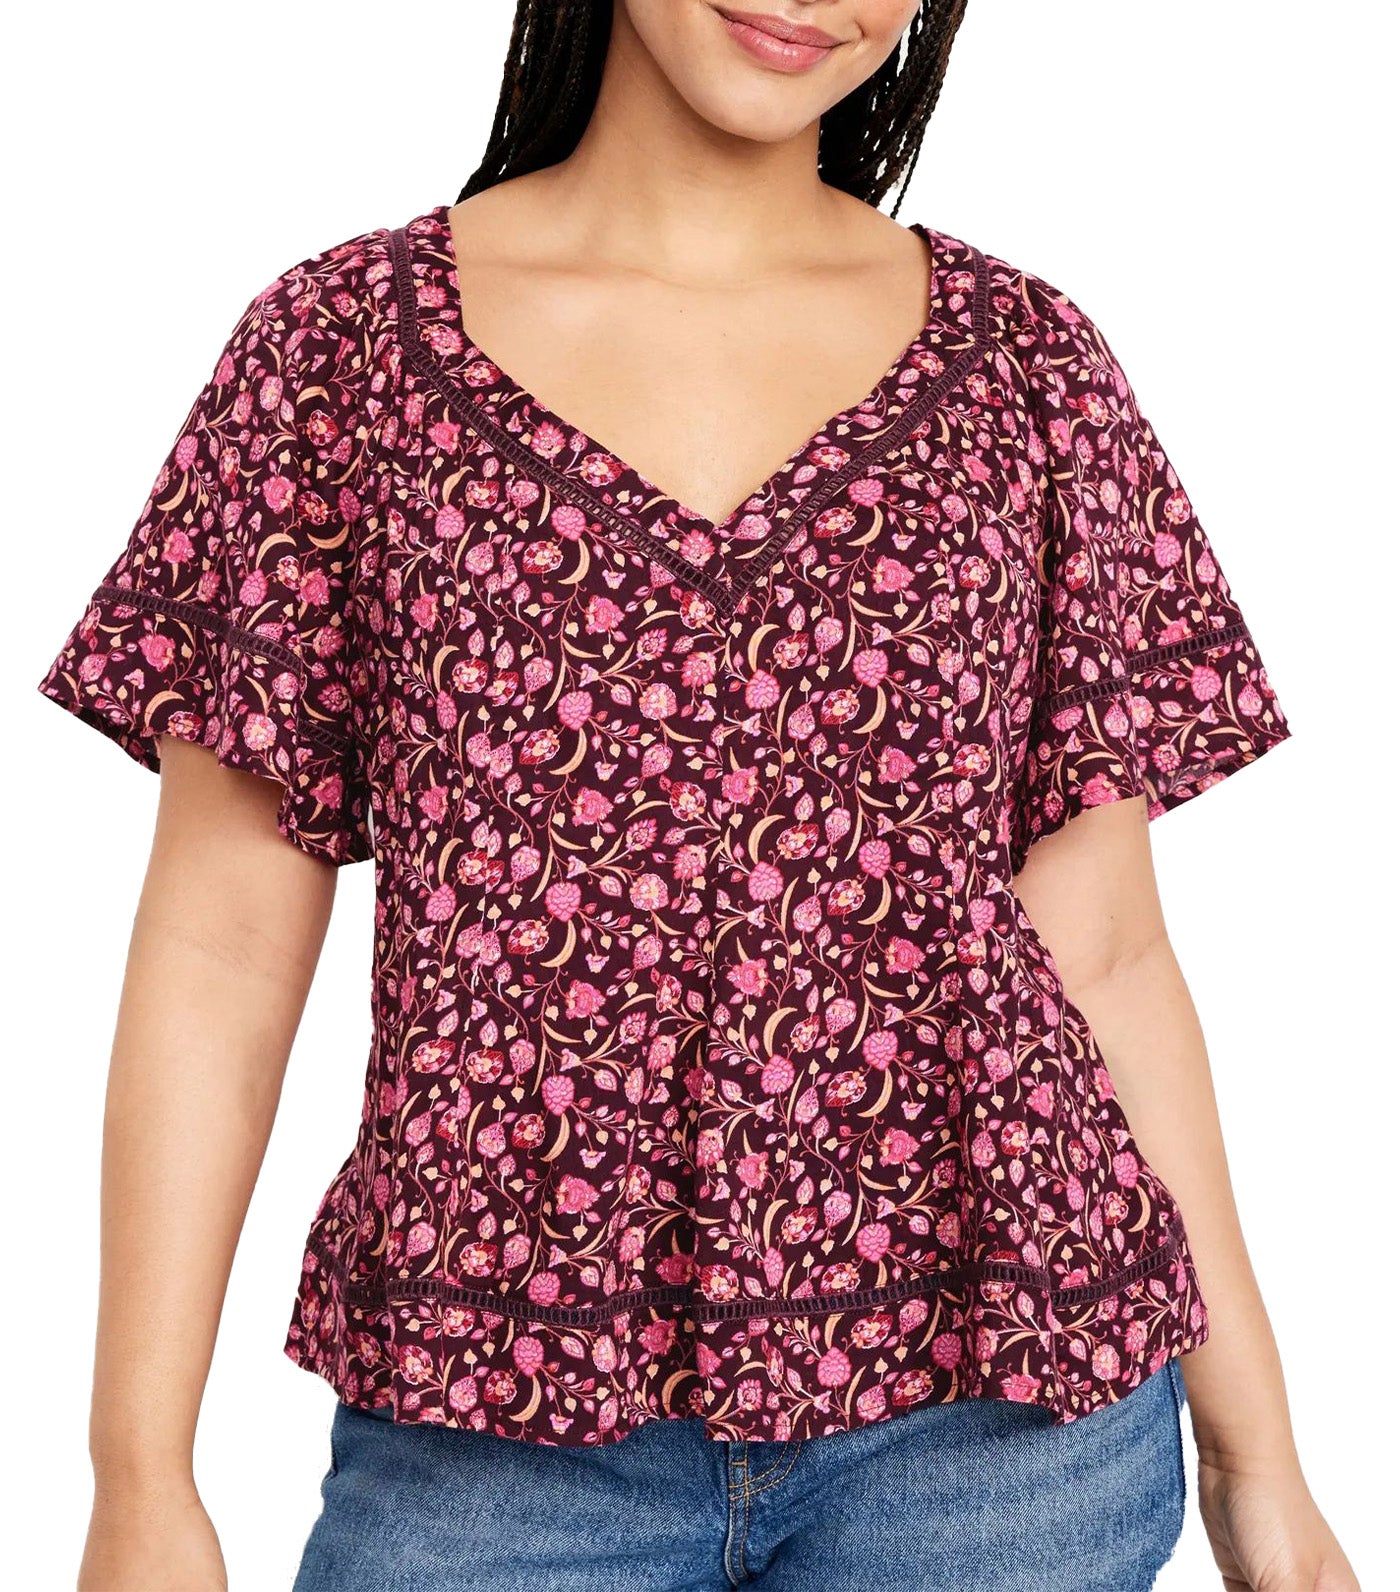 V-Neck Lace-Trim Top for Women Red Floral